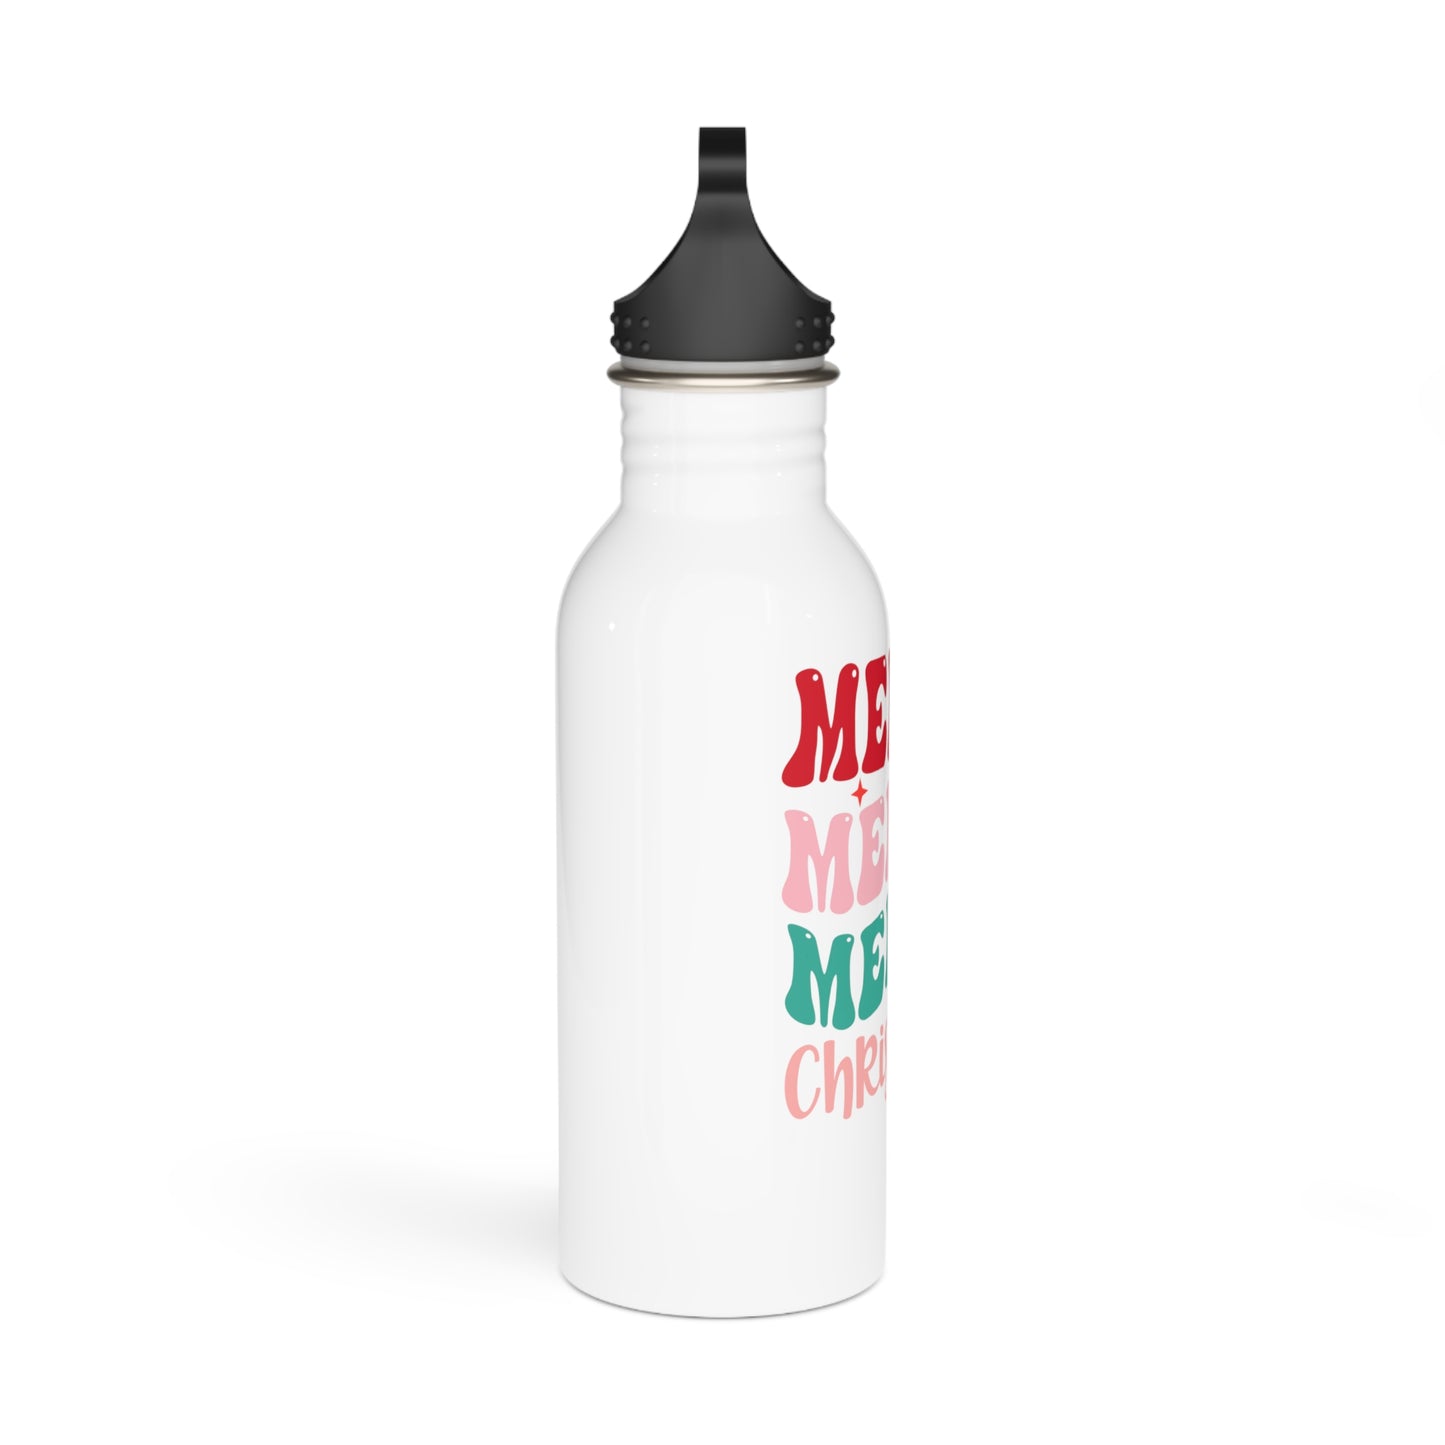 Merry Merry Christmas Stainless Steel Water Bottle